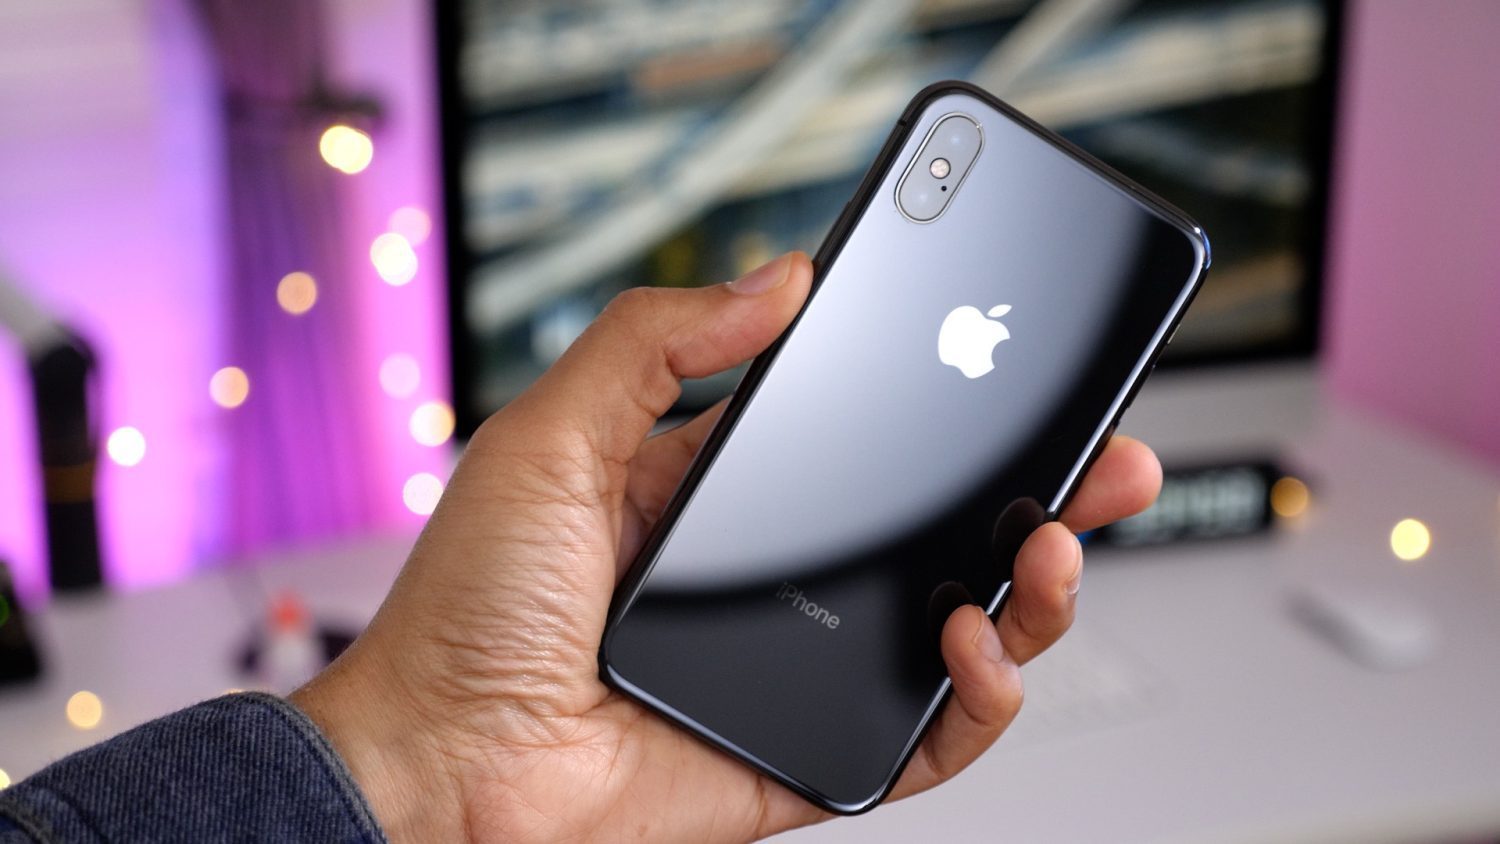 iPhone X vs iPhone 11 comparison: Should you upgrade?